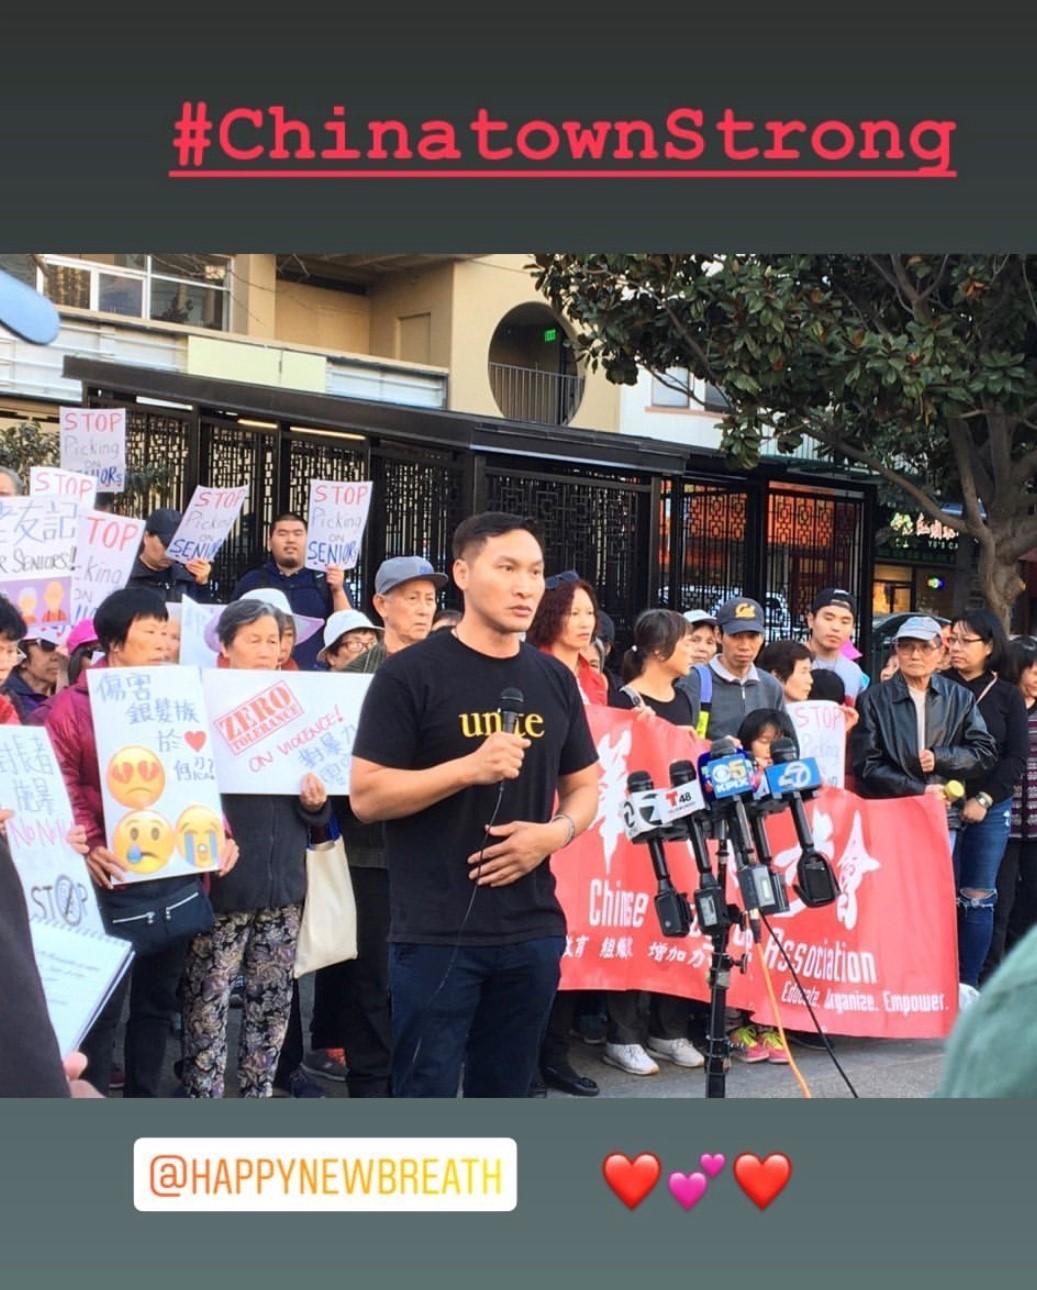 #chinatownstrong